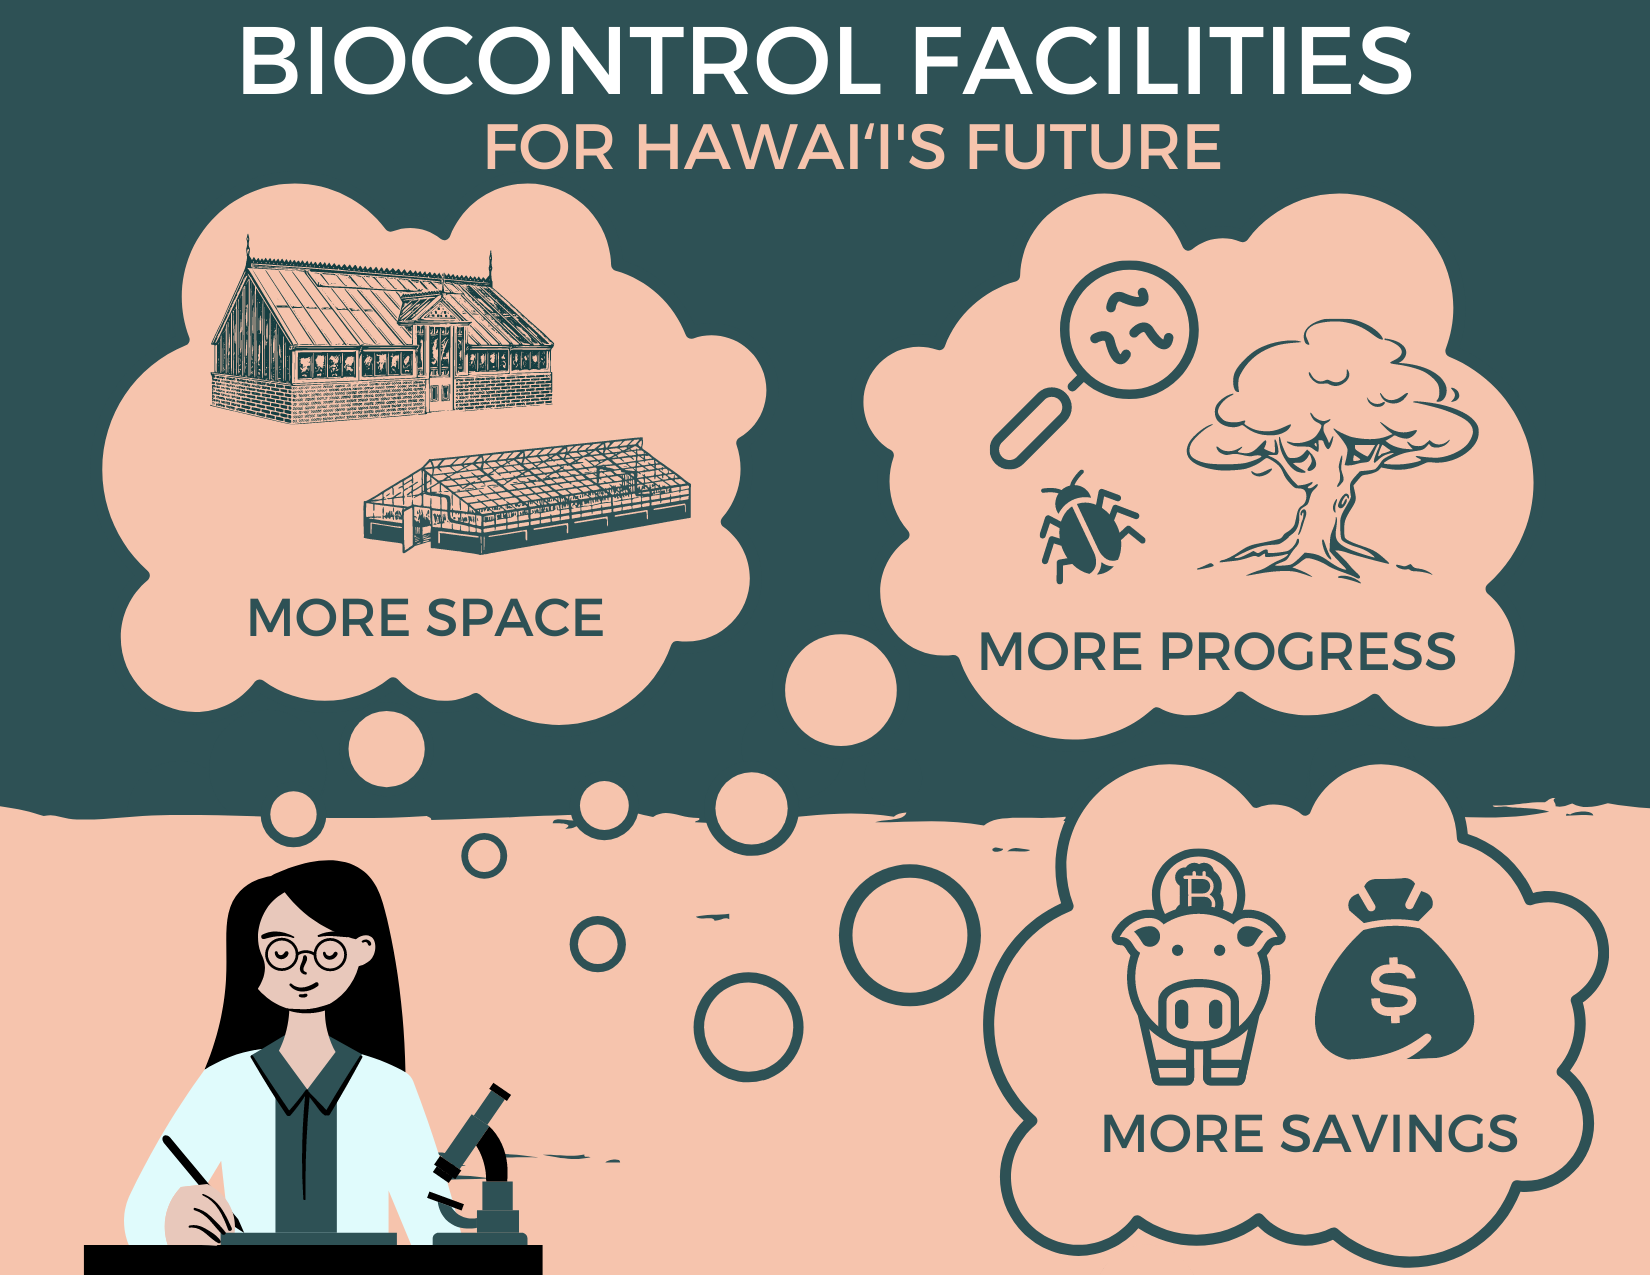 A graphic showing a scientist planning new biocontrol facilities